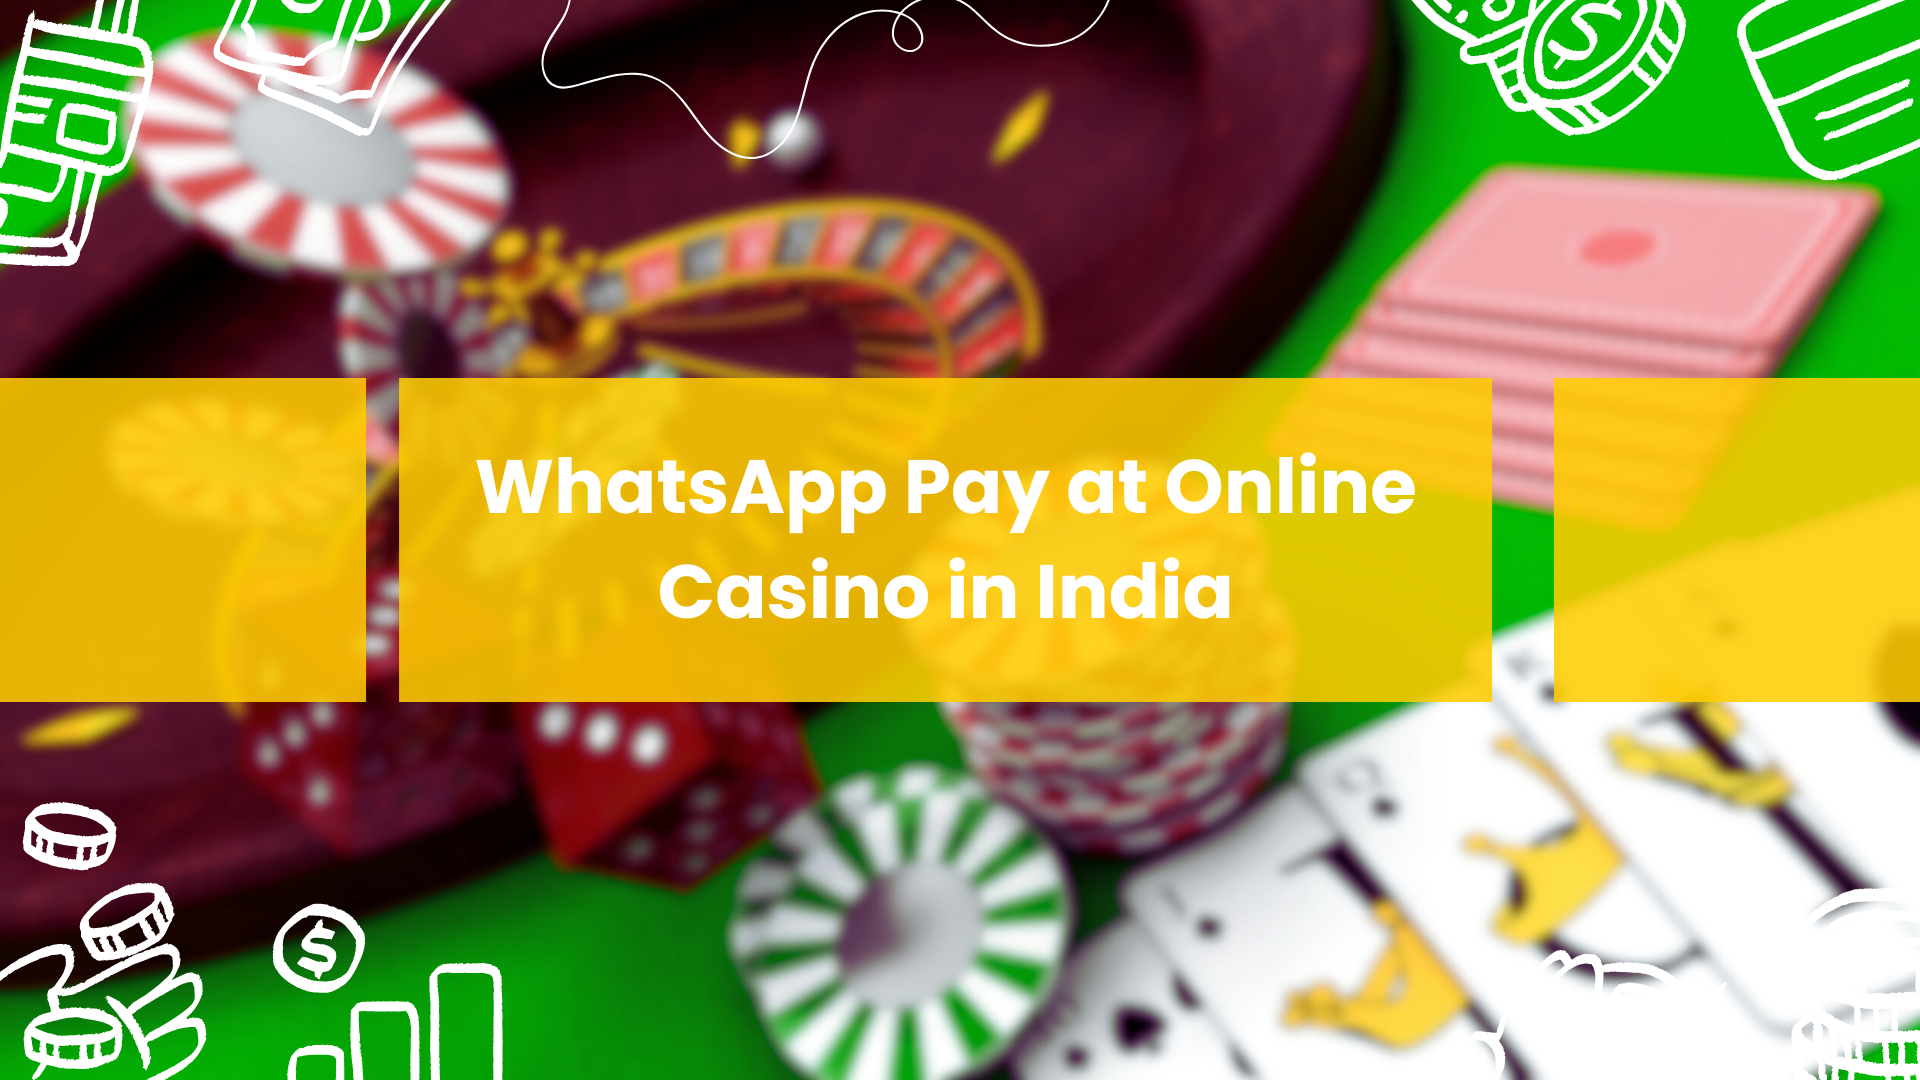 WhatsApp Pay at Online Casino in India